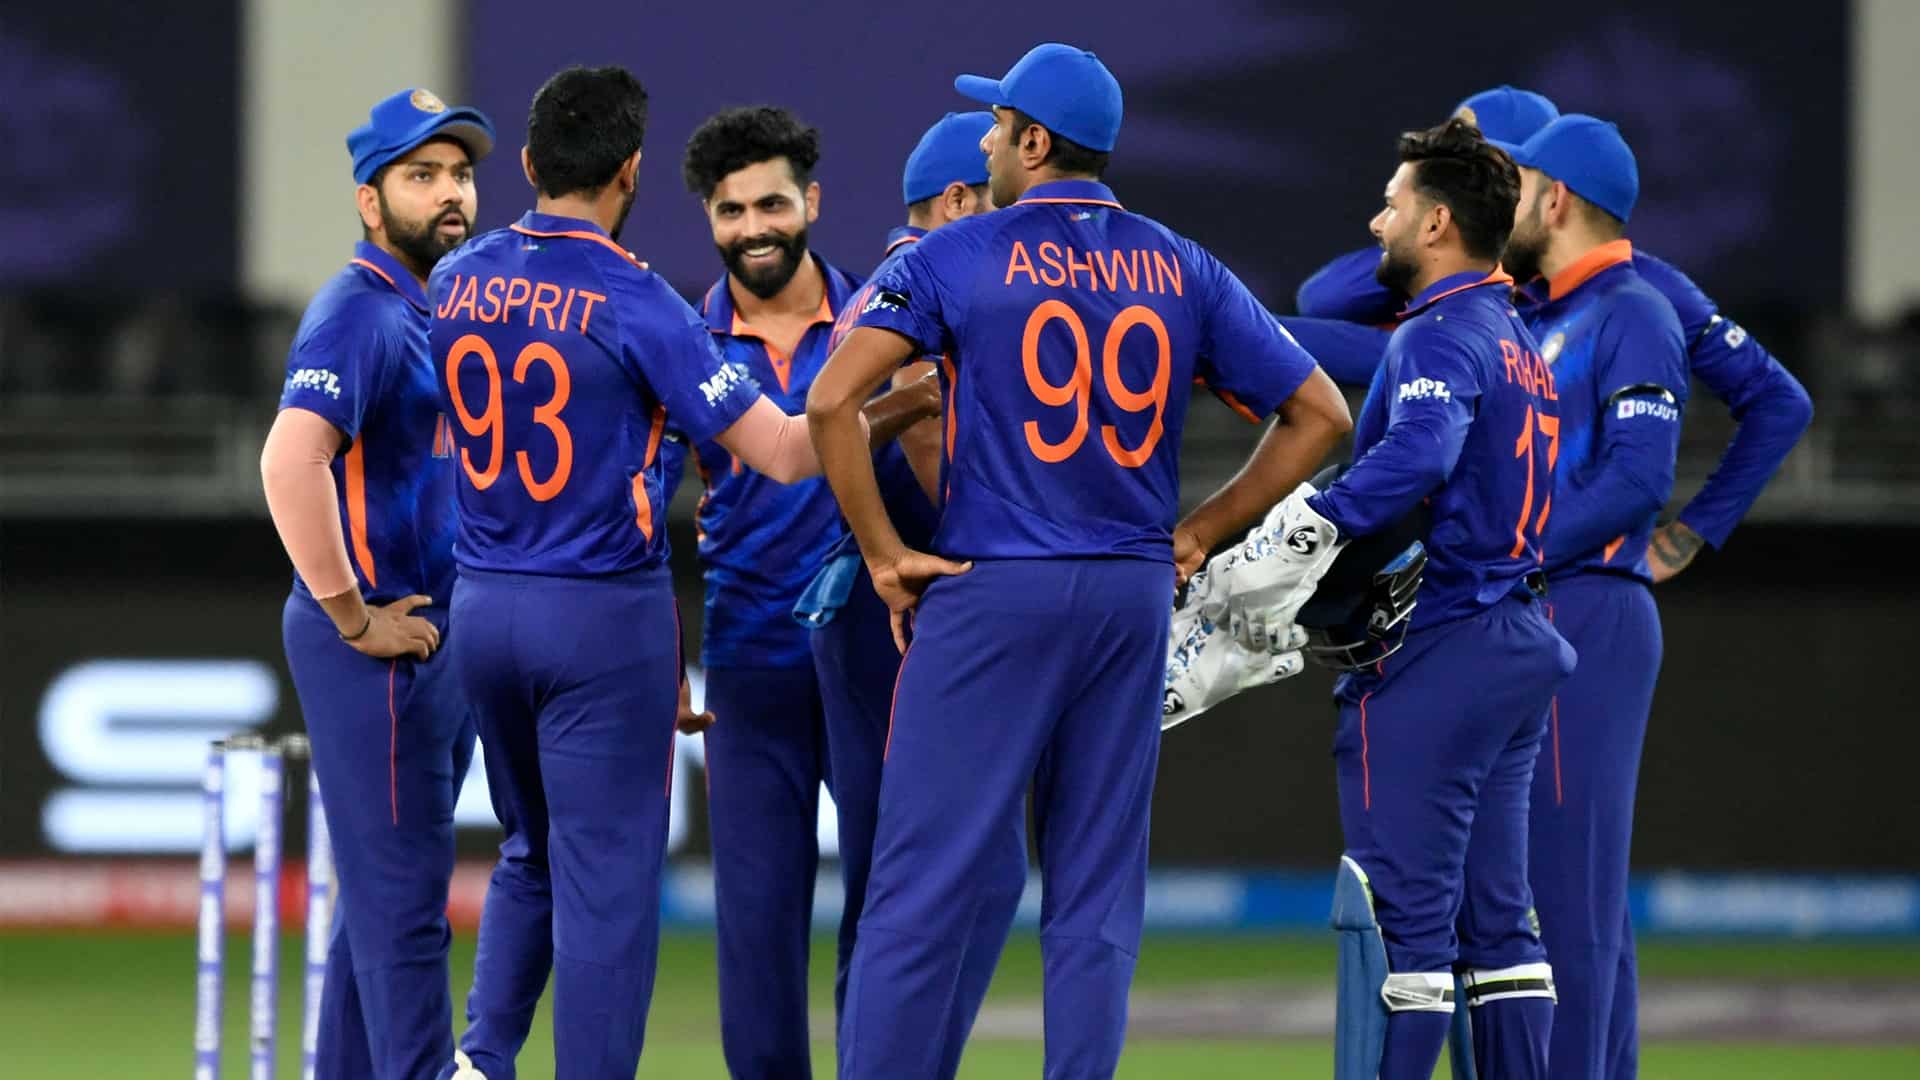 Wasim Jaffer Names The Australian Players Who Can Trouble India In ODI Series